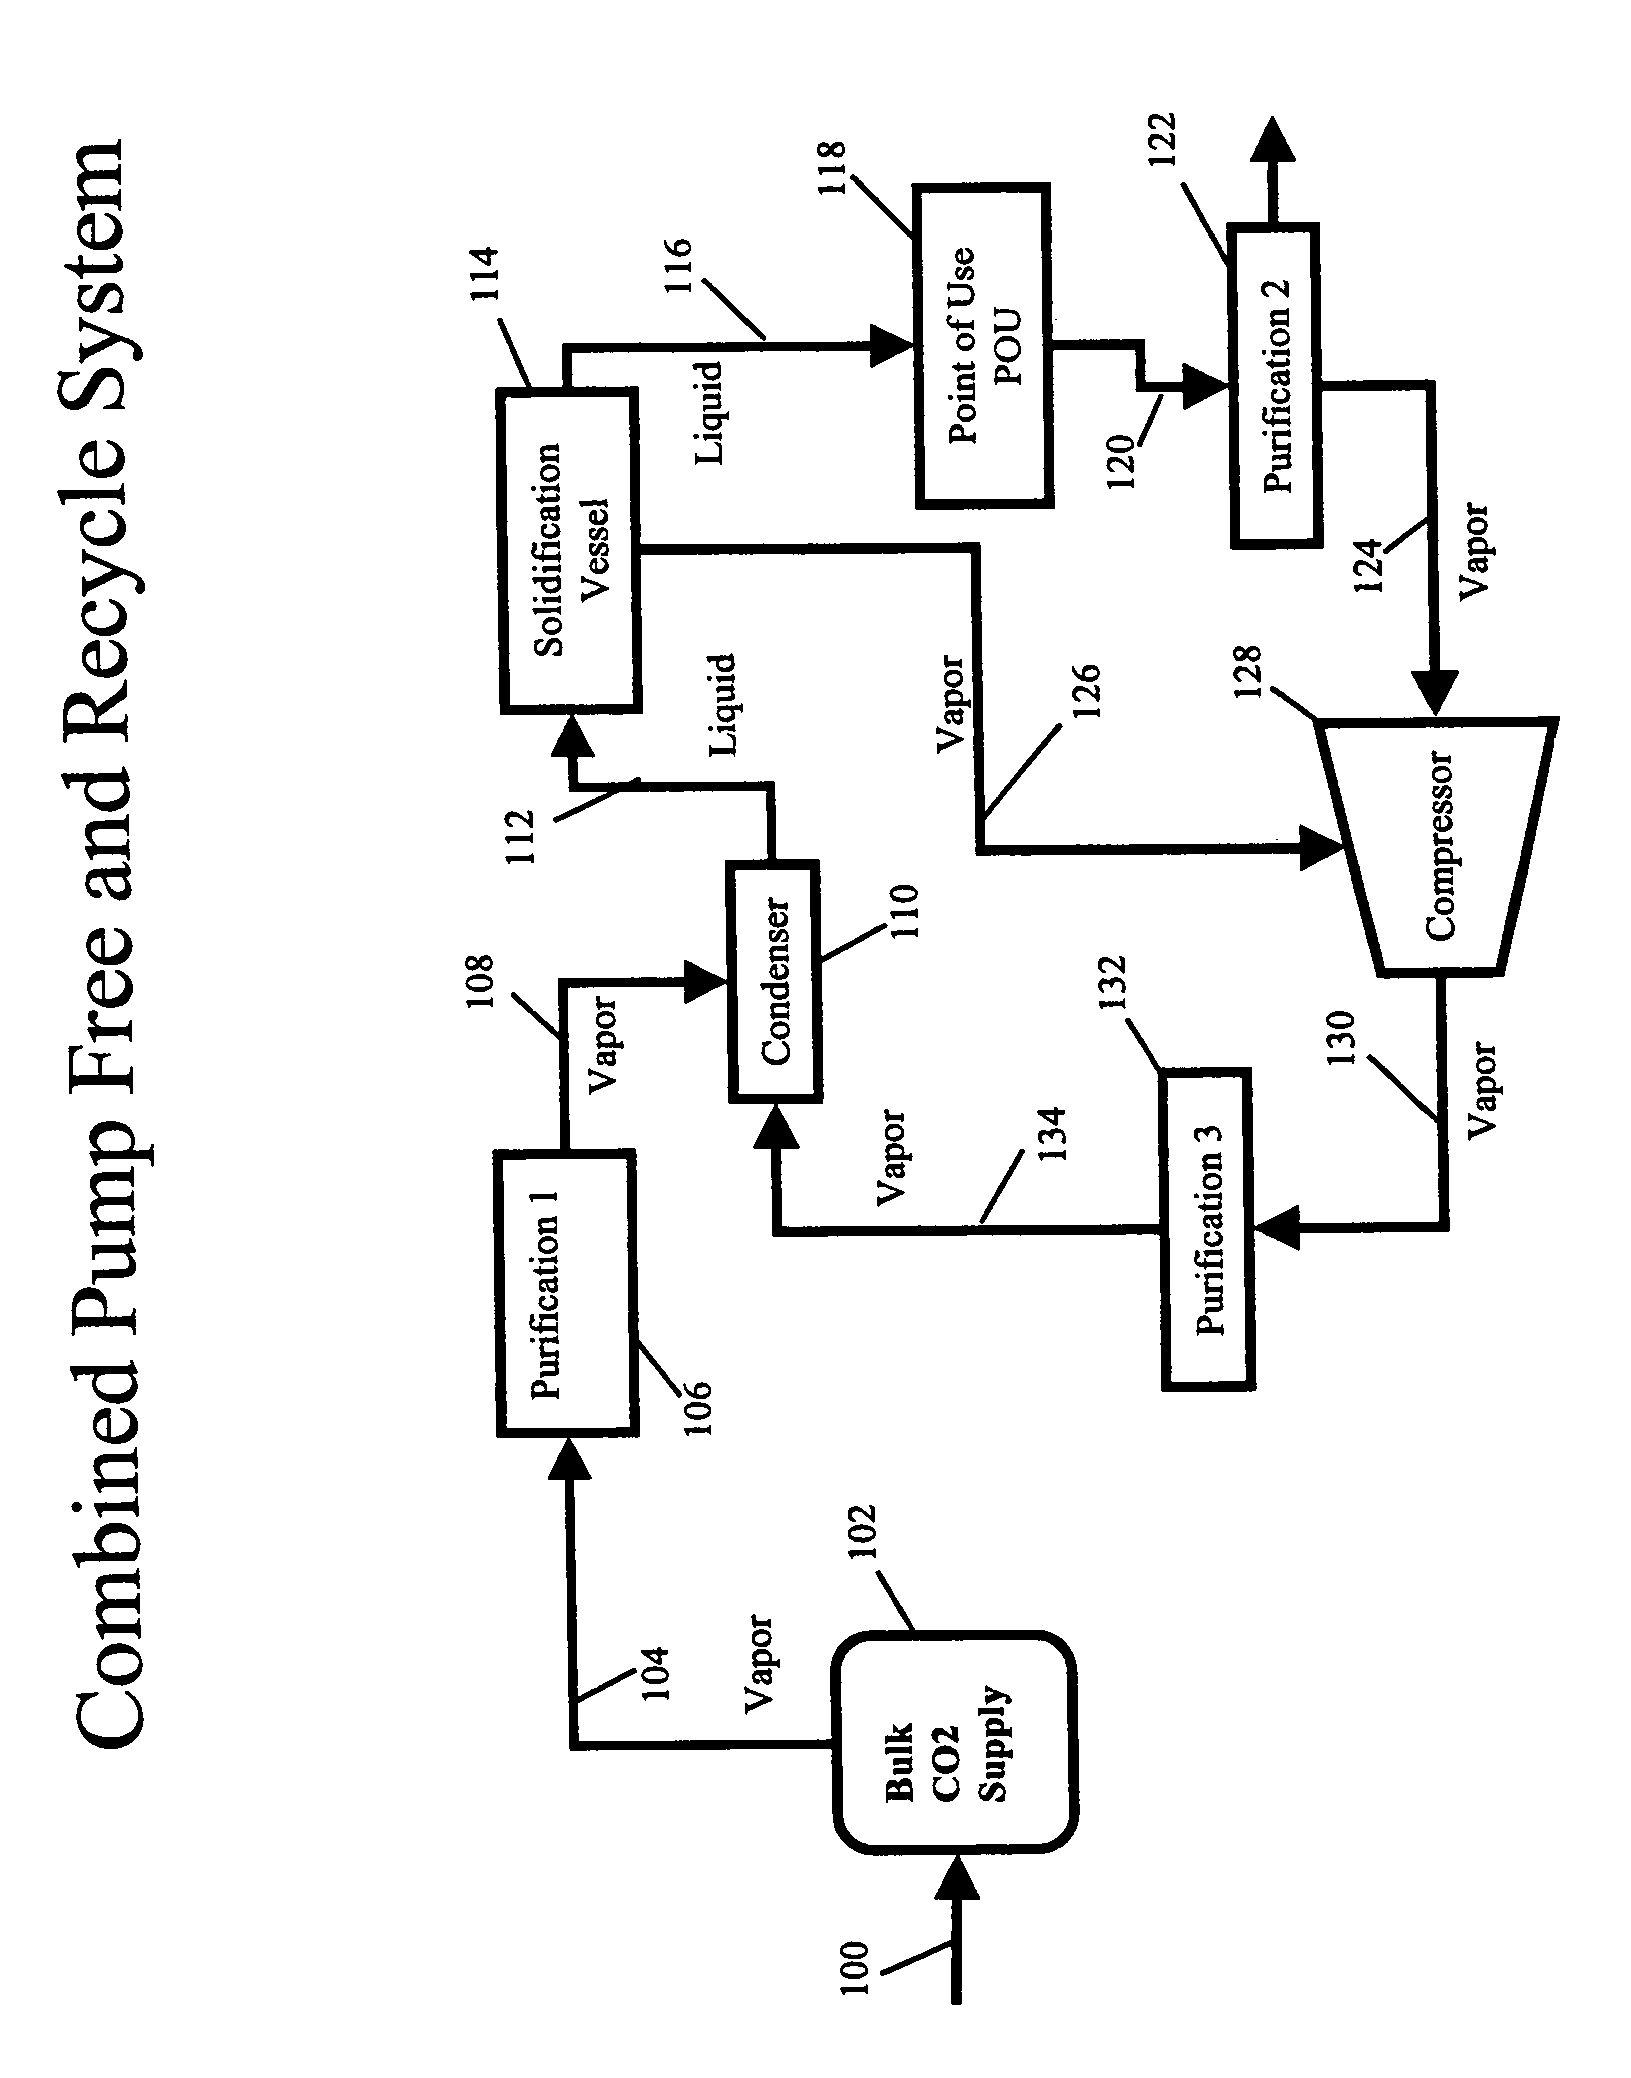 High-pressure delivery system for ultra high purity liquid carbon dioxide